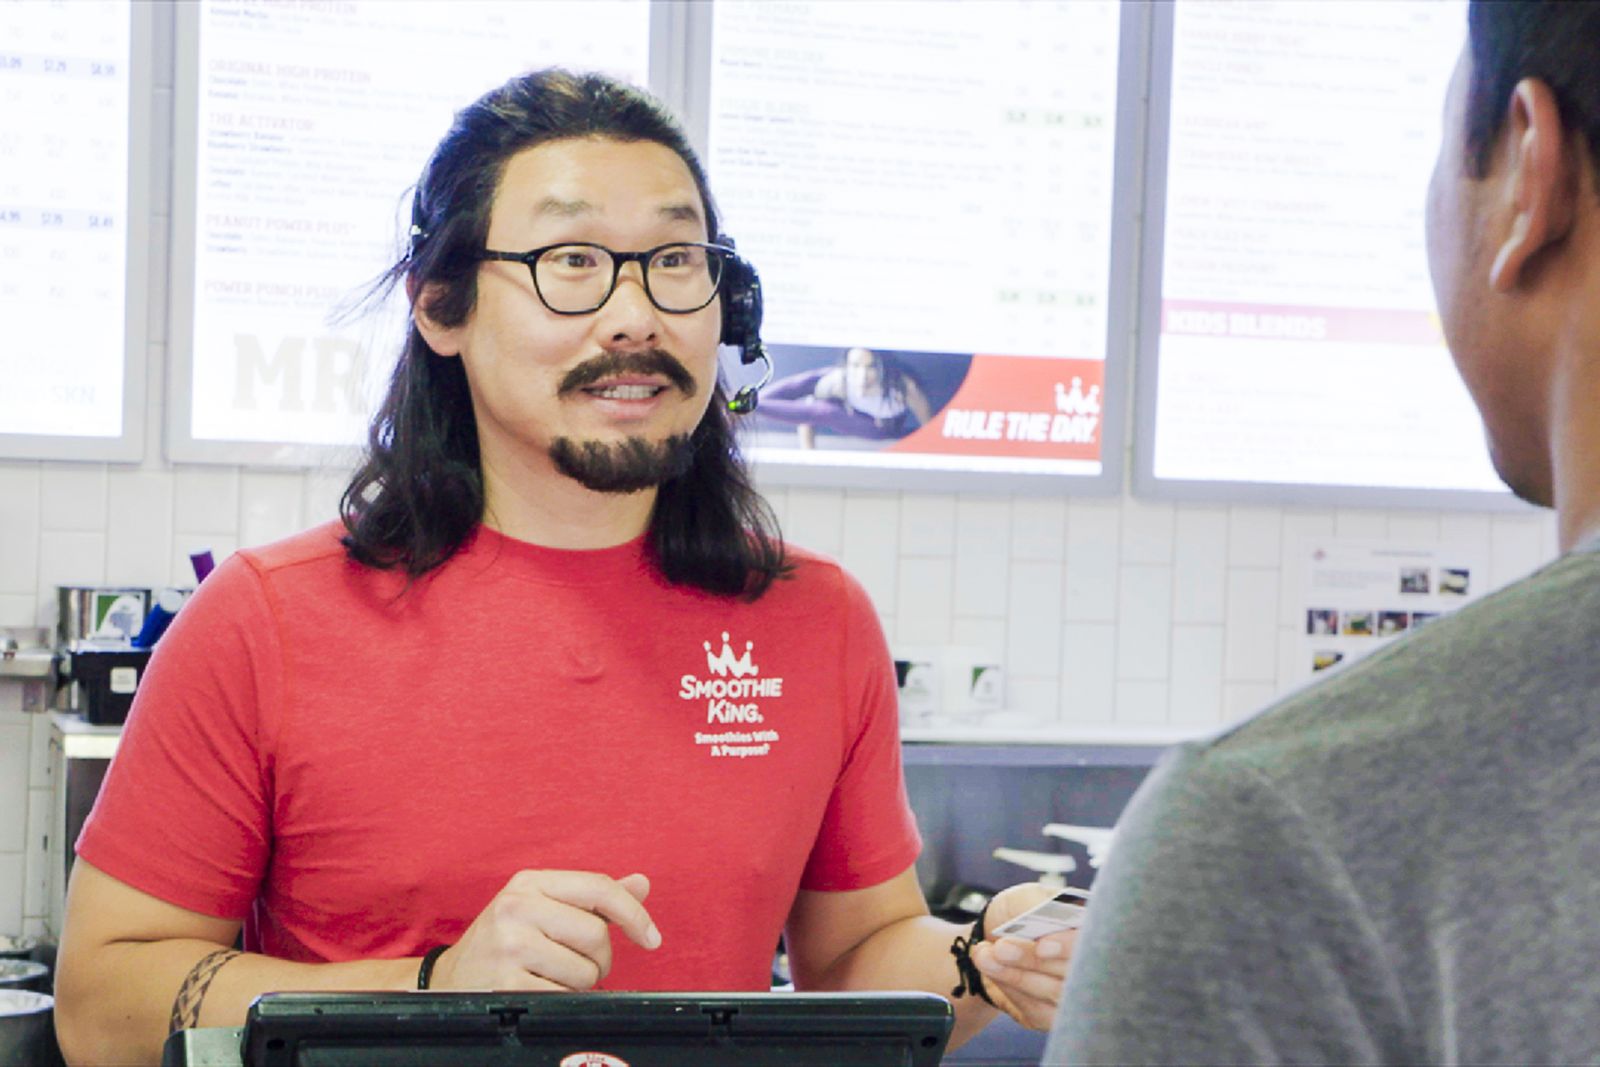 Smoothie King CEO Wan Kim to Be Featured on CBS' Undercover Boss